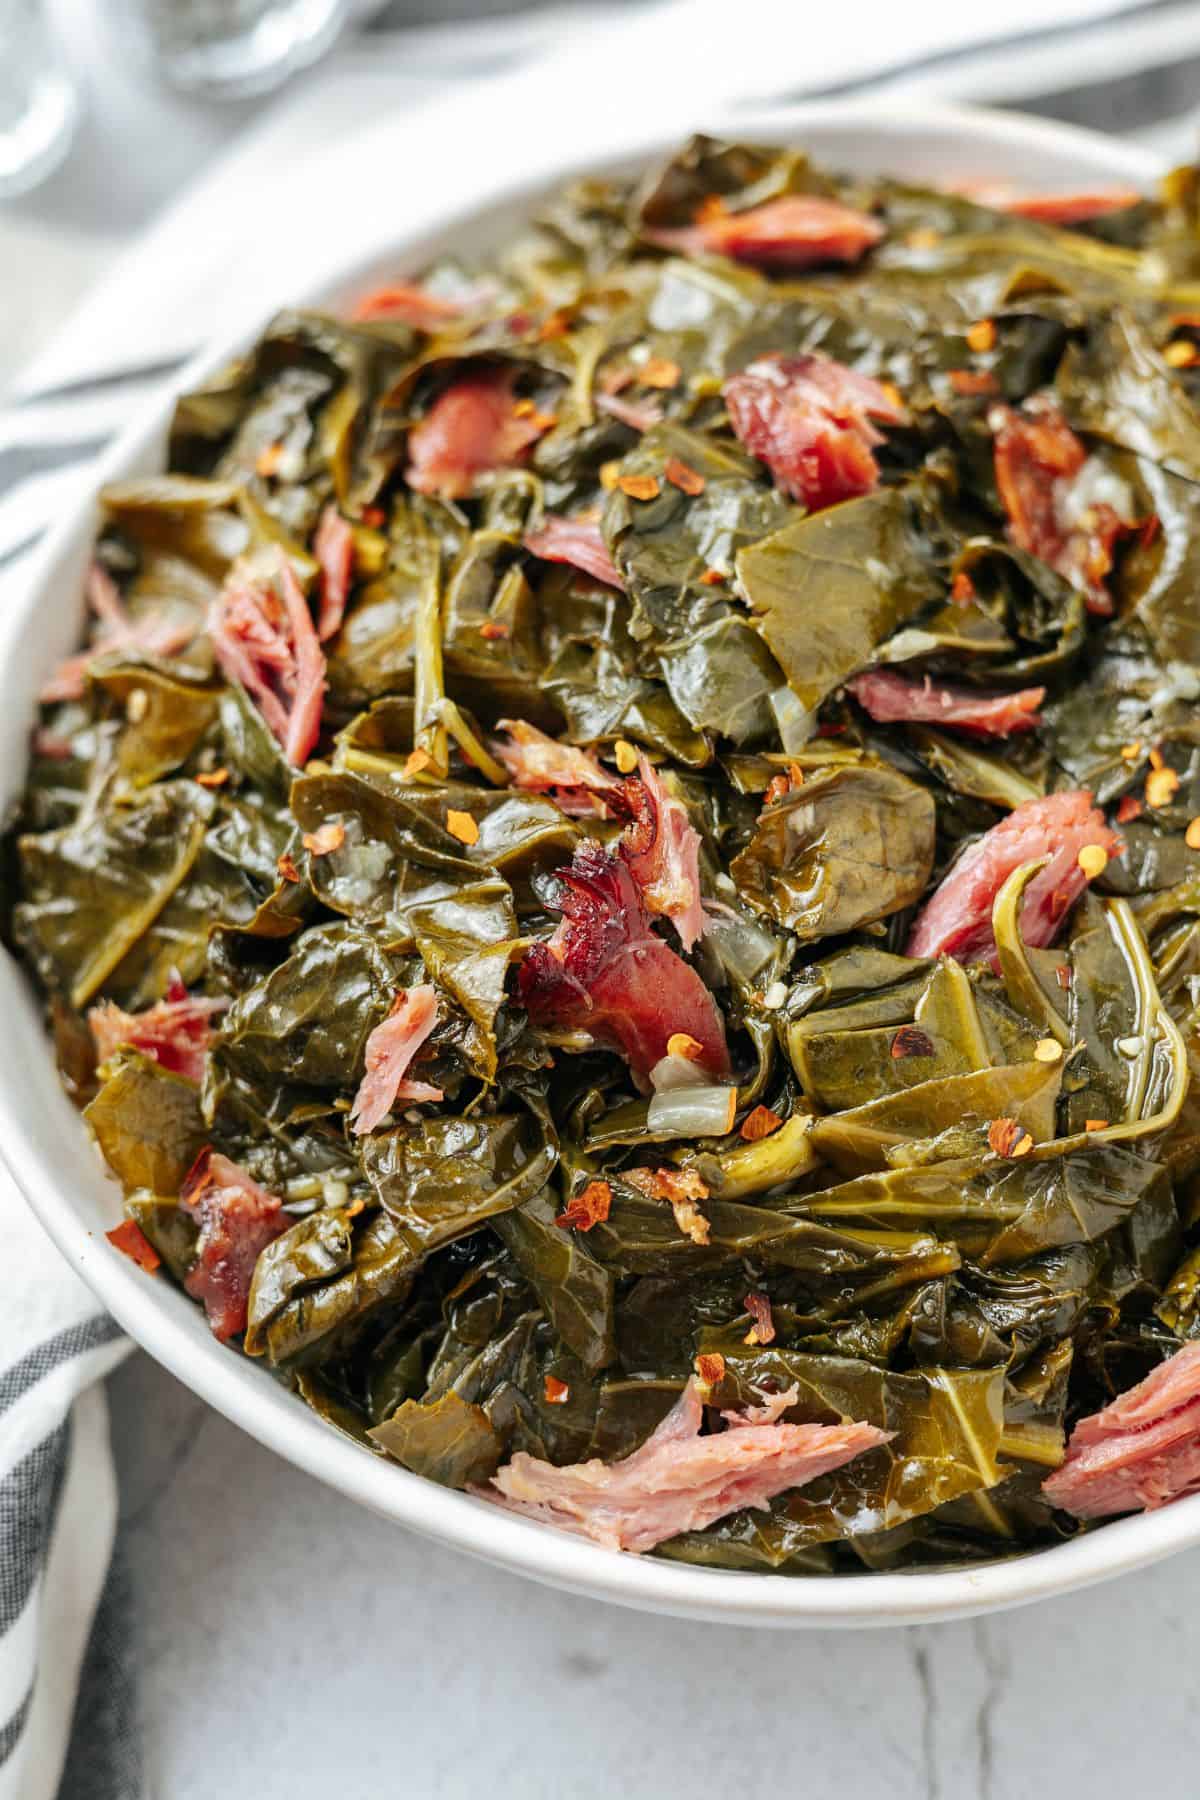 The Best Southern-Style Mustard Greens with Smoked Turkey Recipe